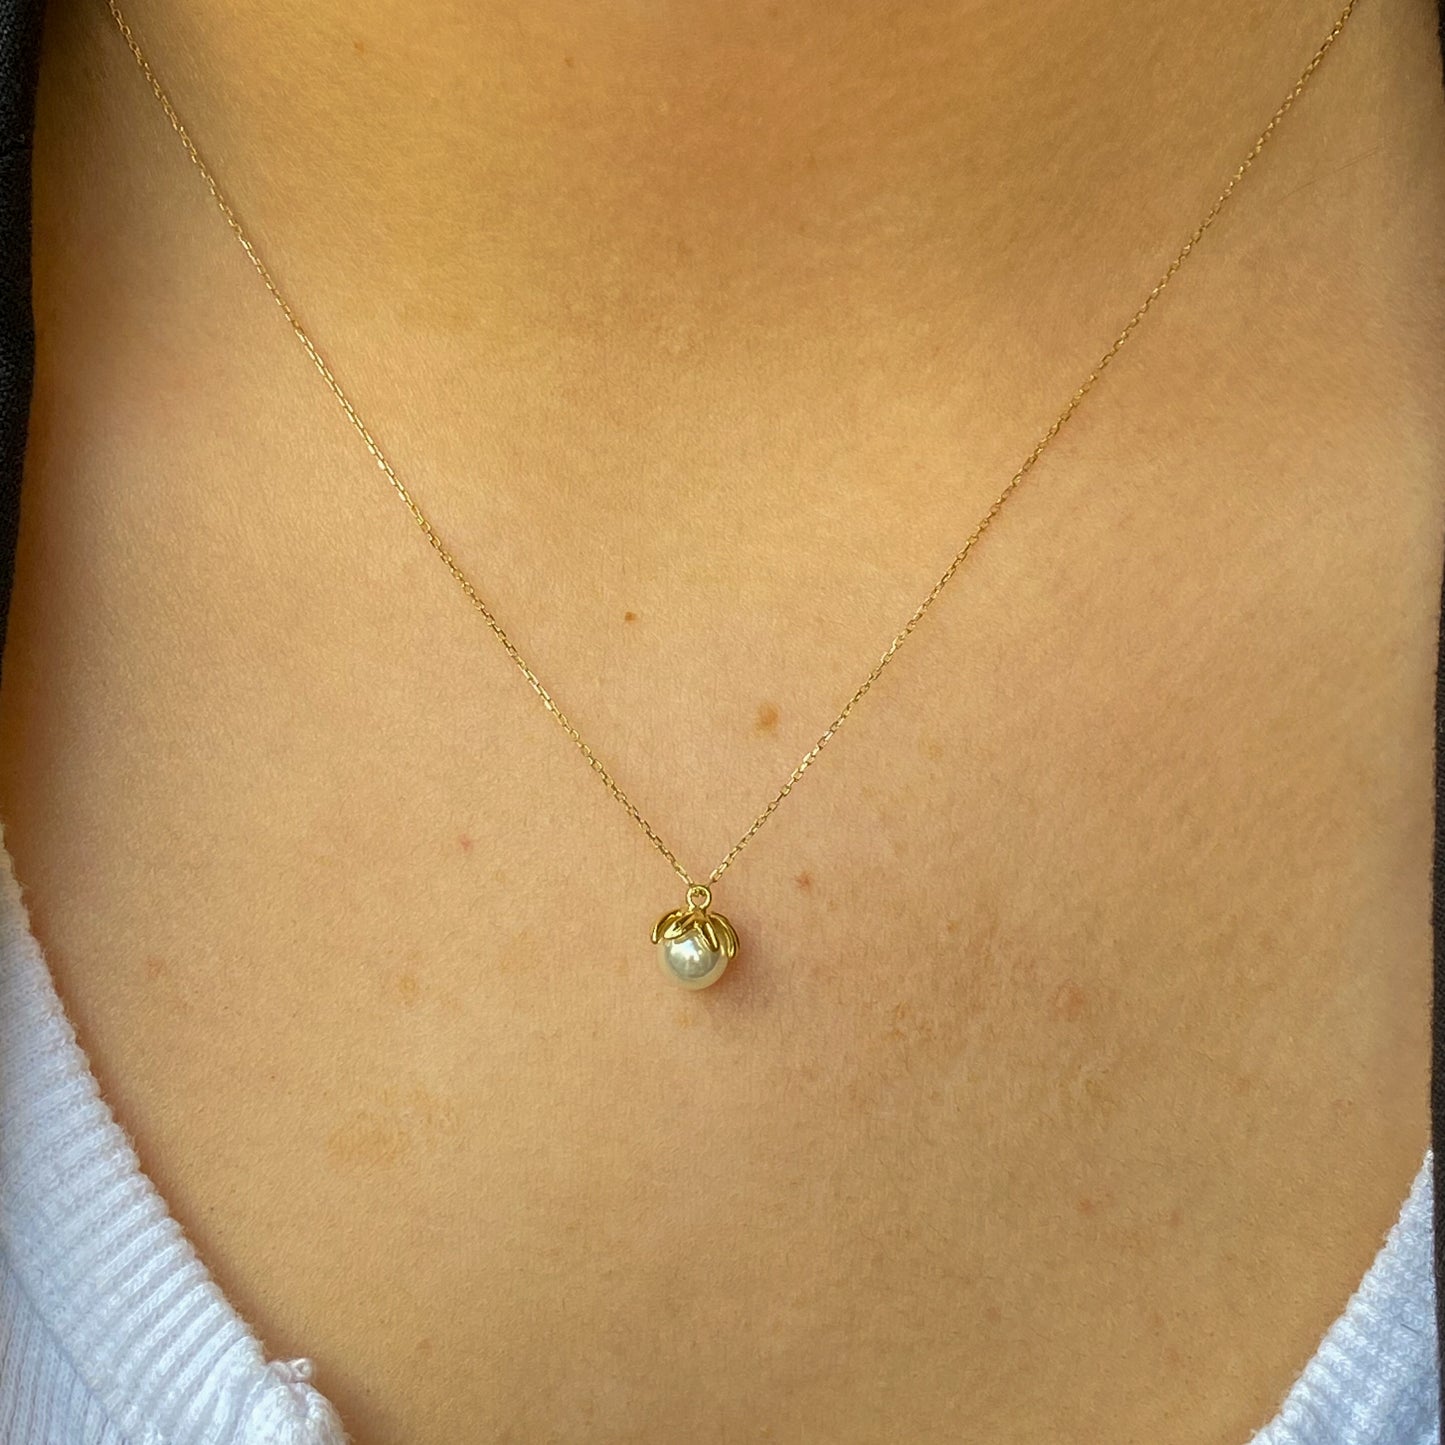 14ct Gold Camellia Pearl Pendant Necklace - John Ross Jewellers